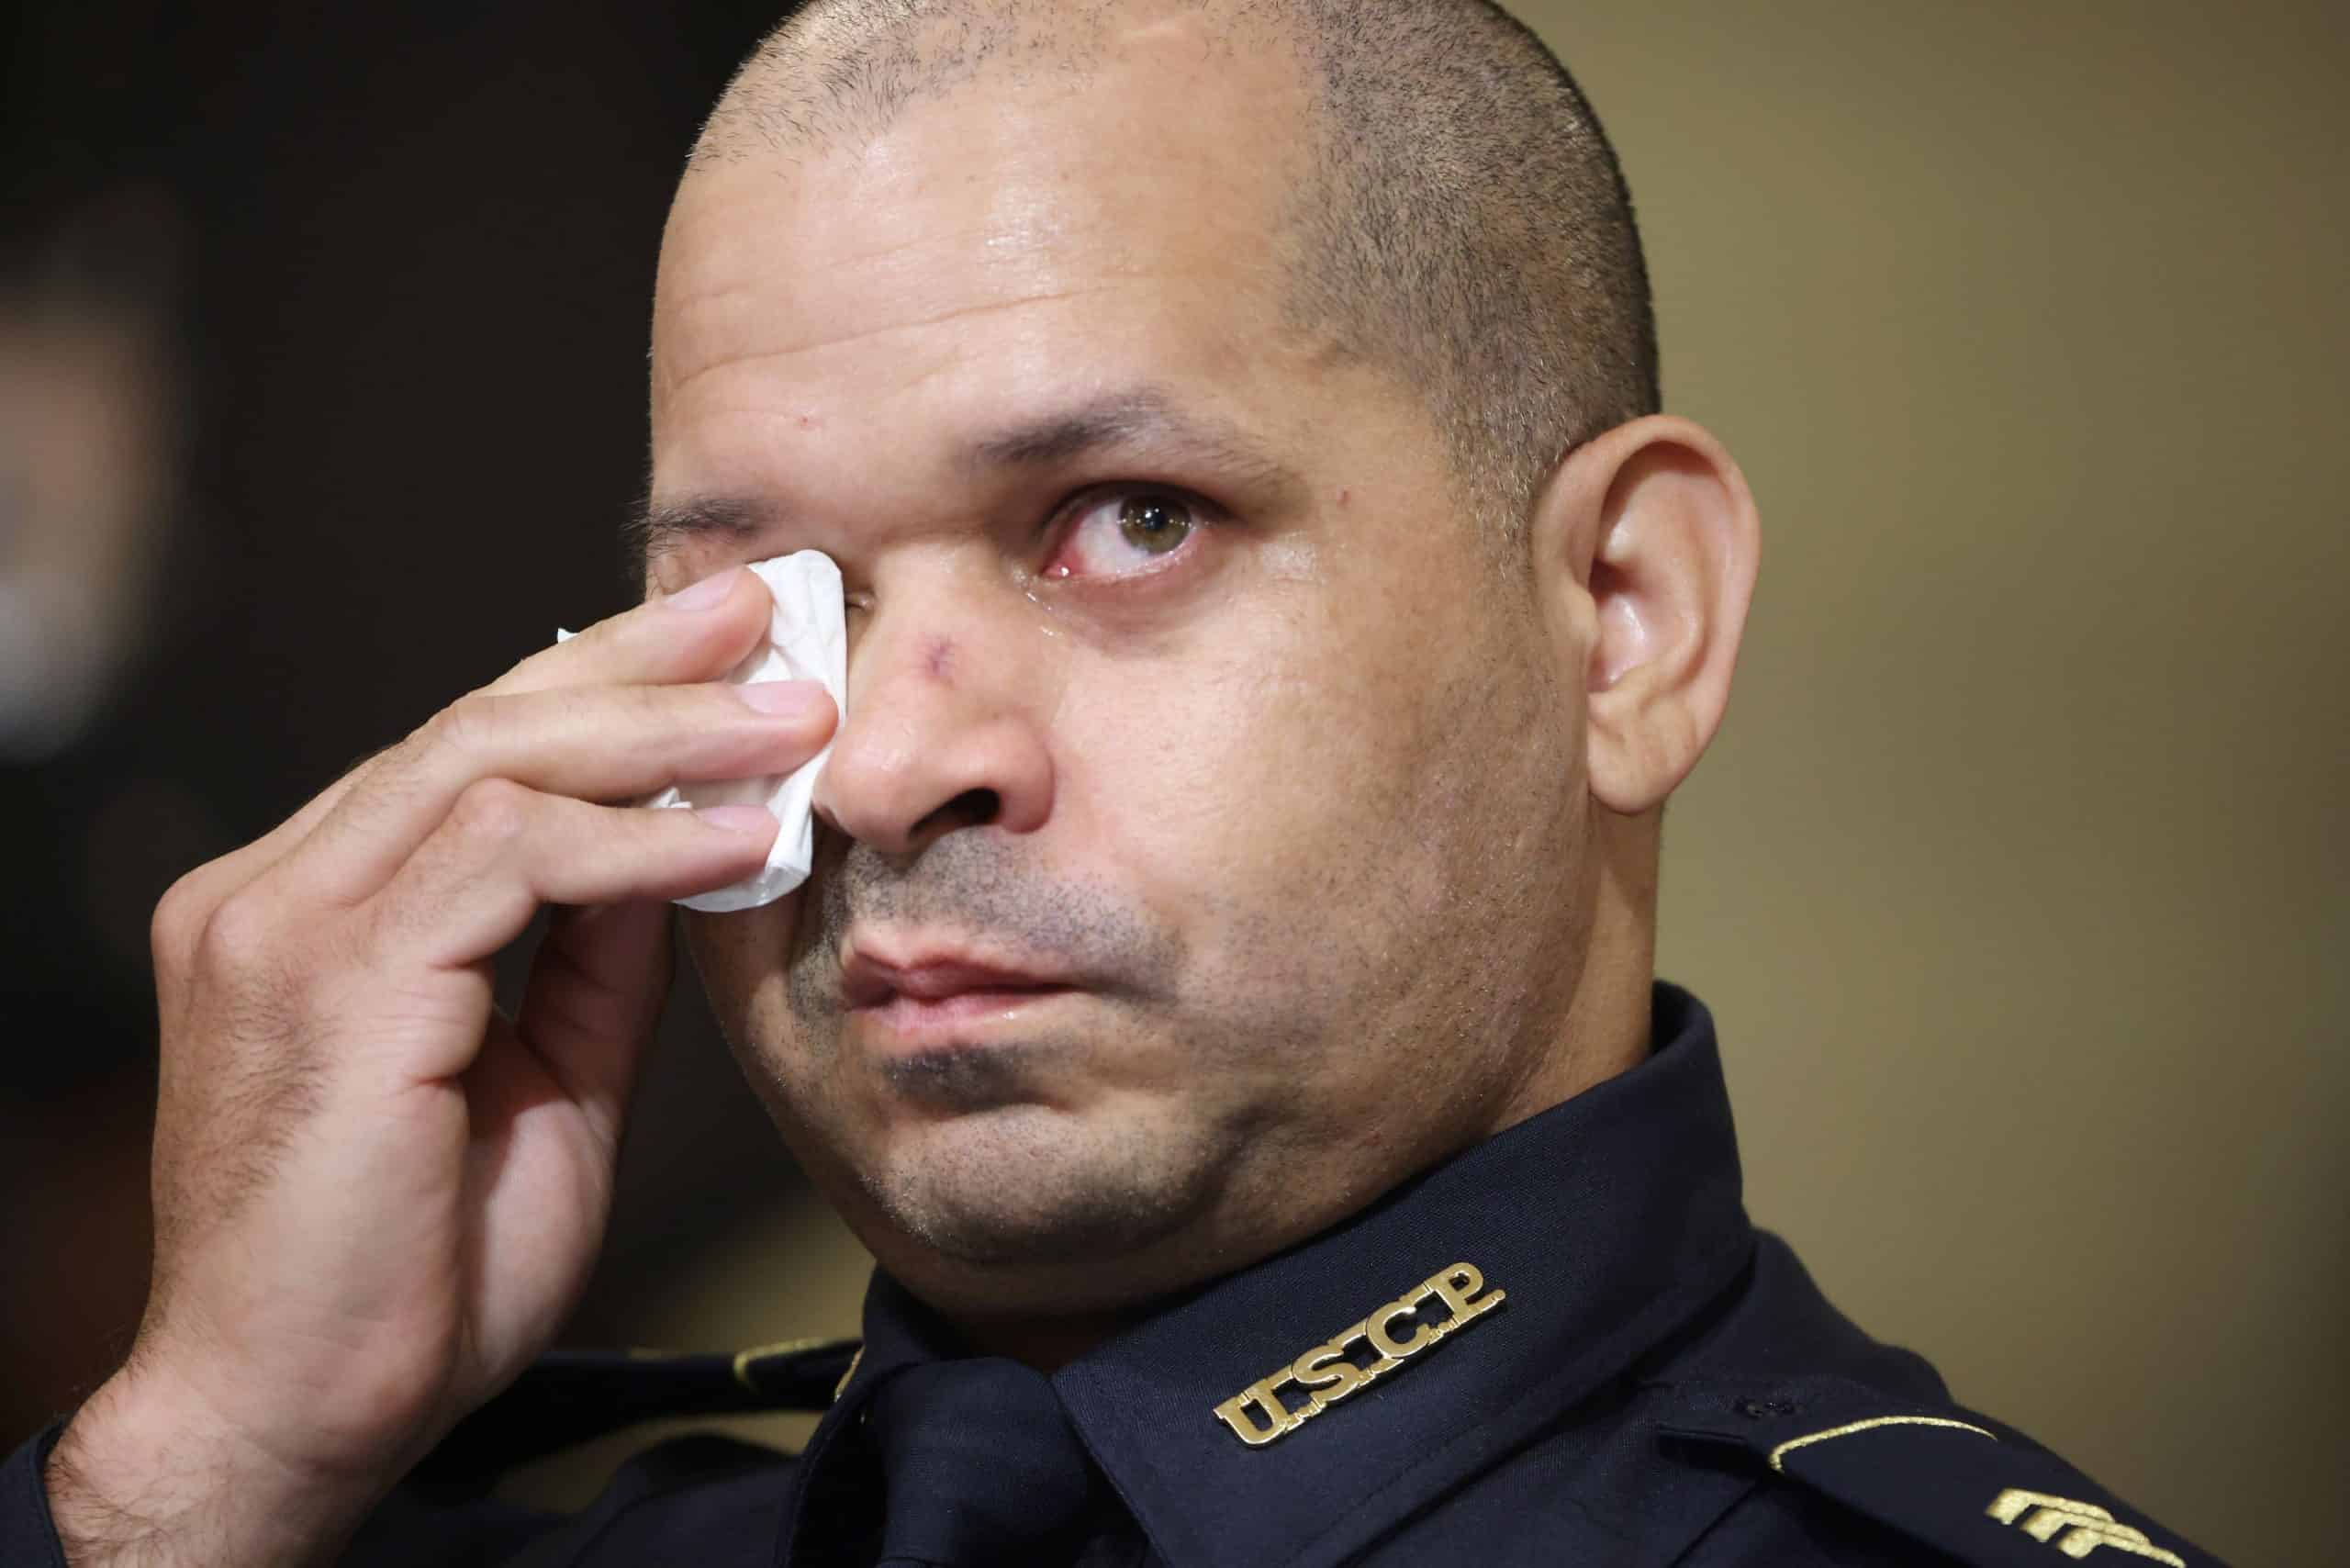 Tearful Capitol policemen say they feared for their lives at hands of pro-Trump mob